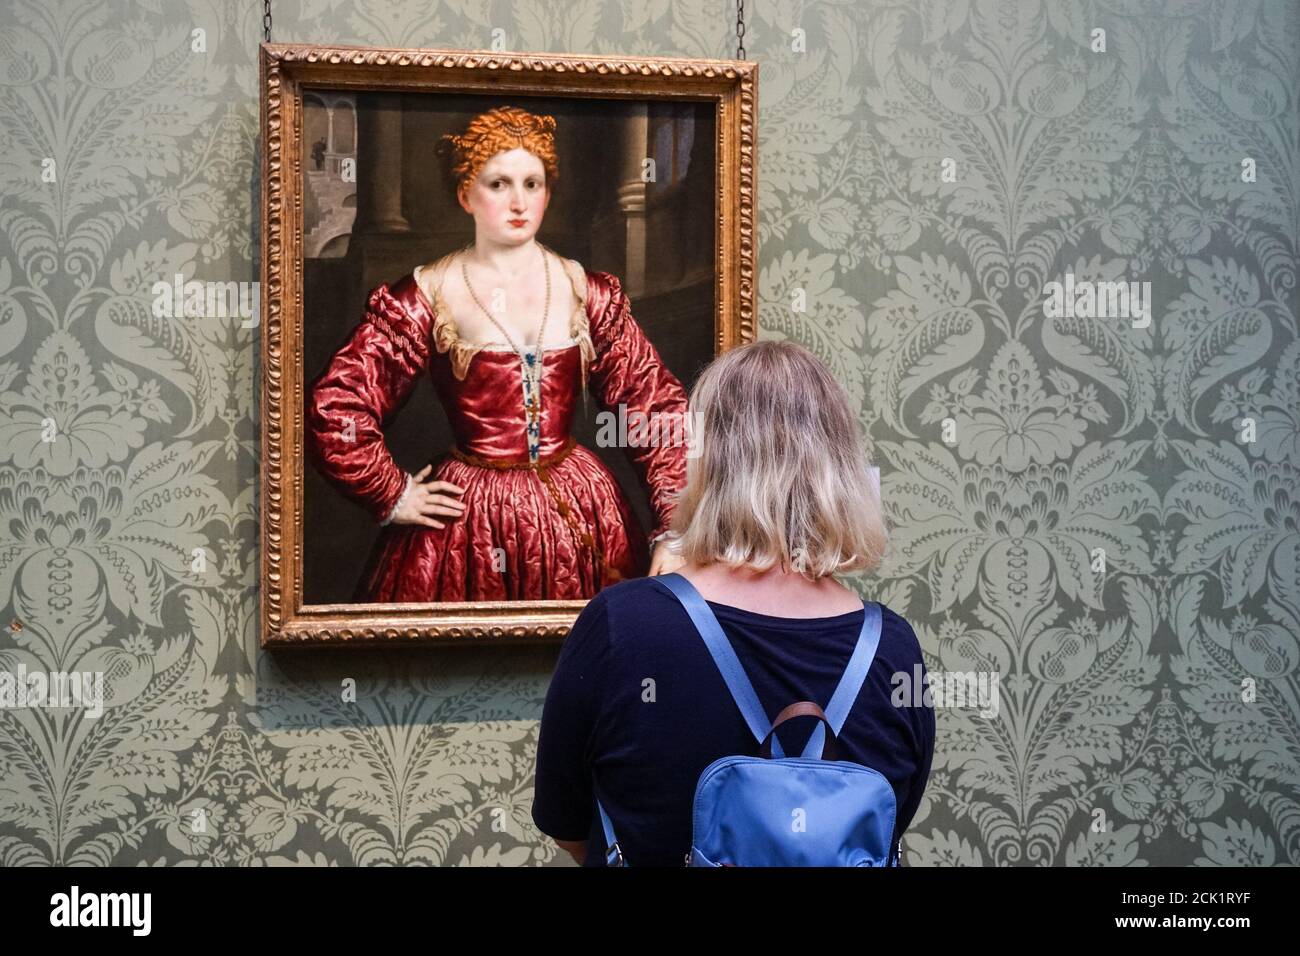 Young woman looking at painting, Portrait of a Young Woman by Paris Bordone, at the National Gallery in London, England United Kingdom UK Stock Photo